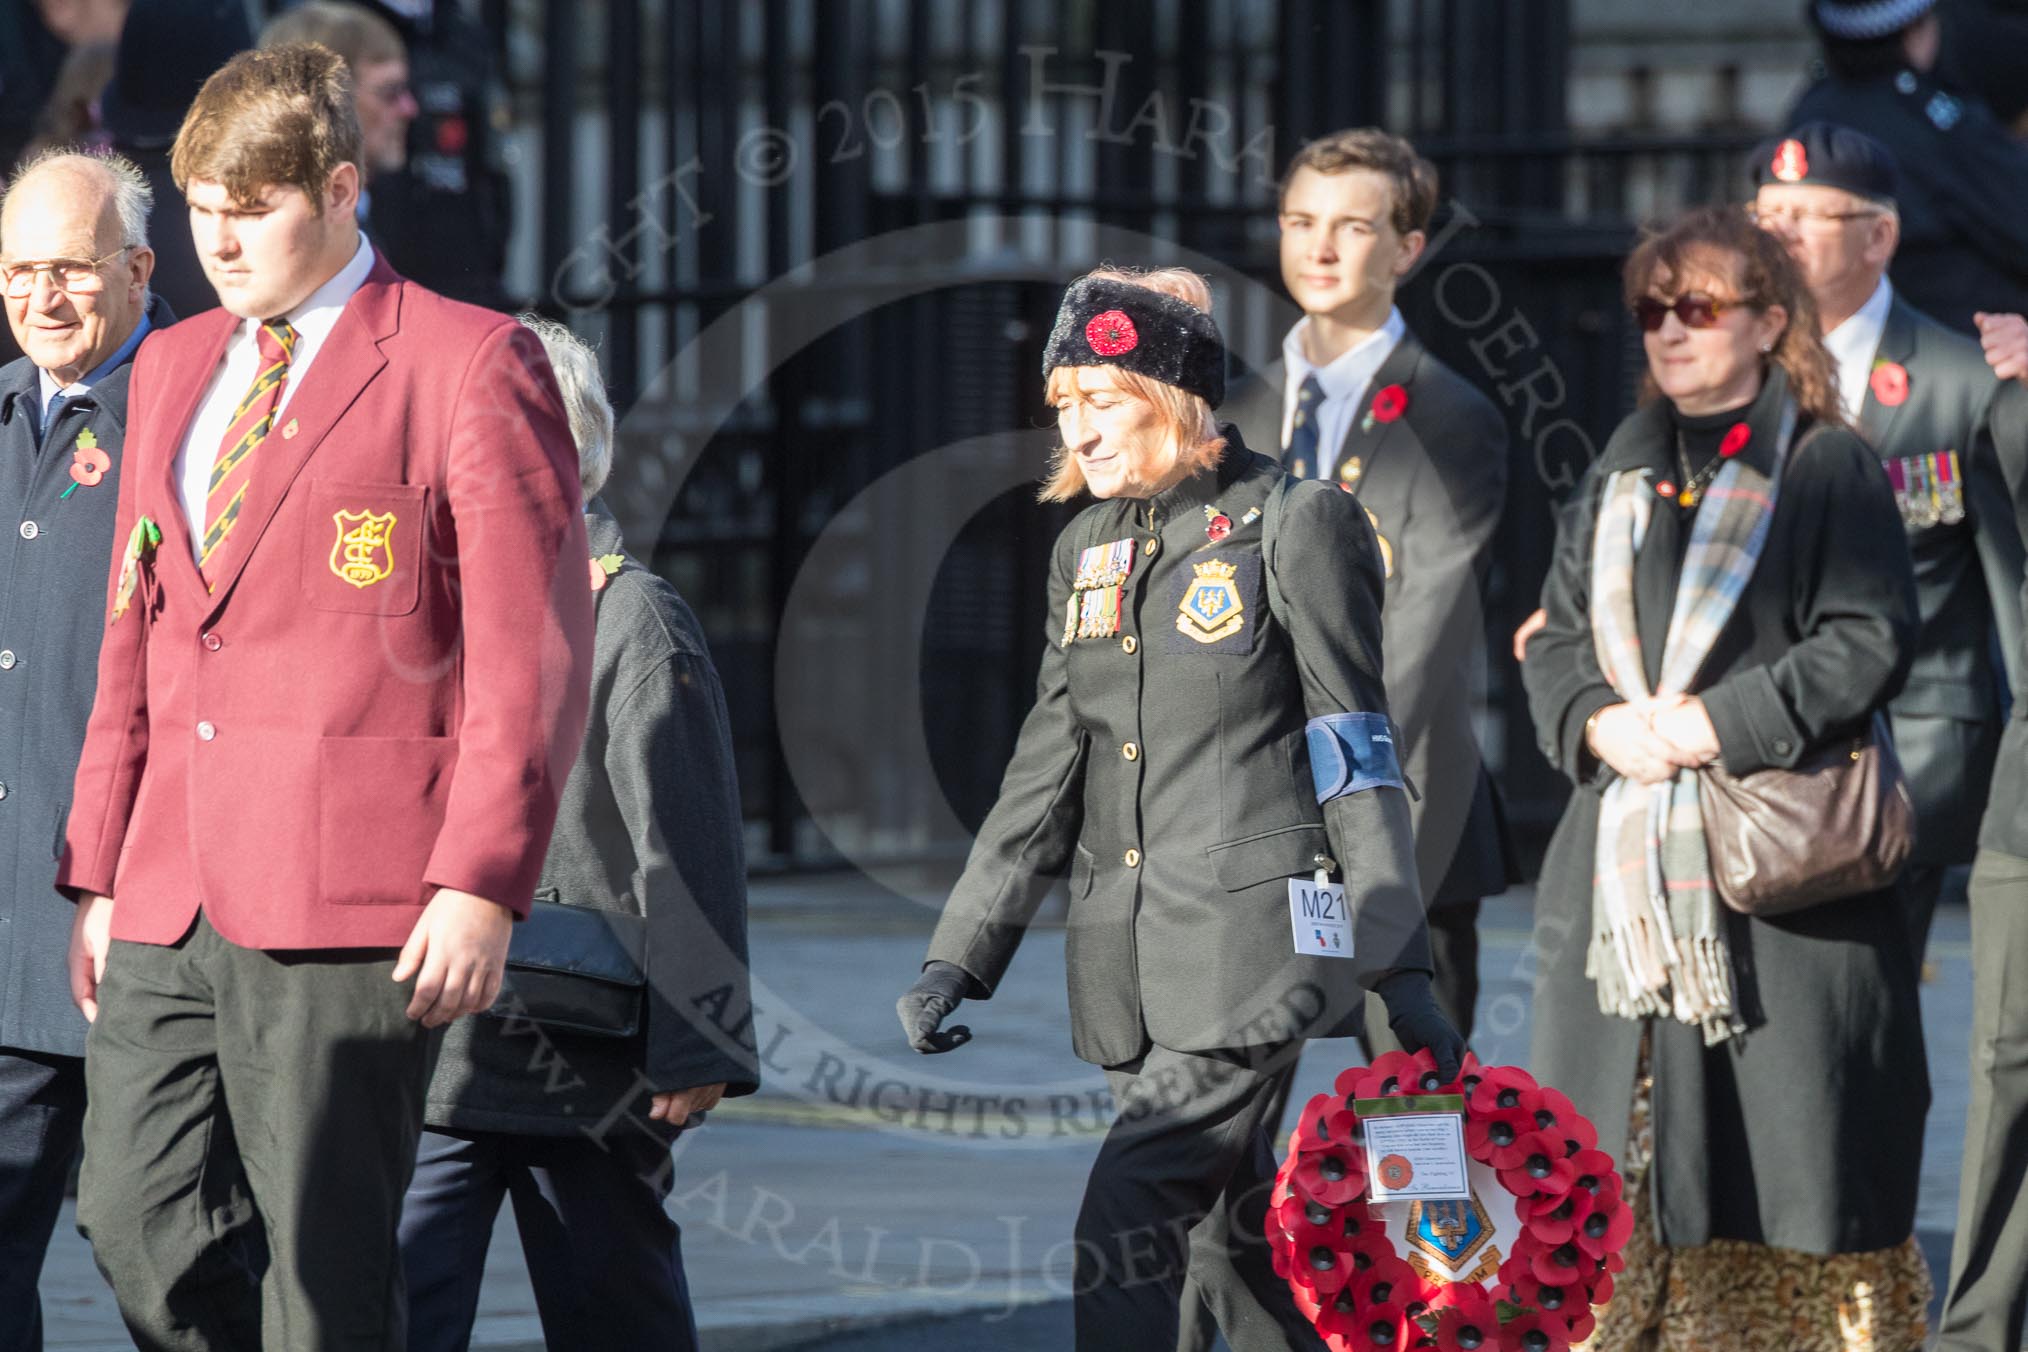 March Past, Remembrance Sunday at the Cenotaph 2016: M21 Fighting G Club.
Cenotaph, Whitehall, London SW1,
London,
Greater London,
United Kingdom,
on 13 November 2016 at 13:16, image #2656